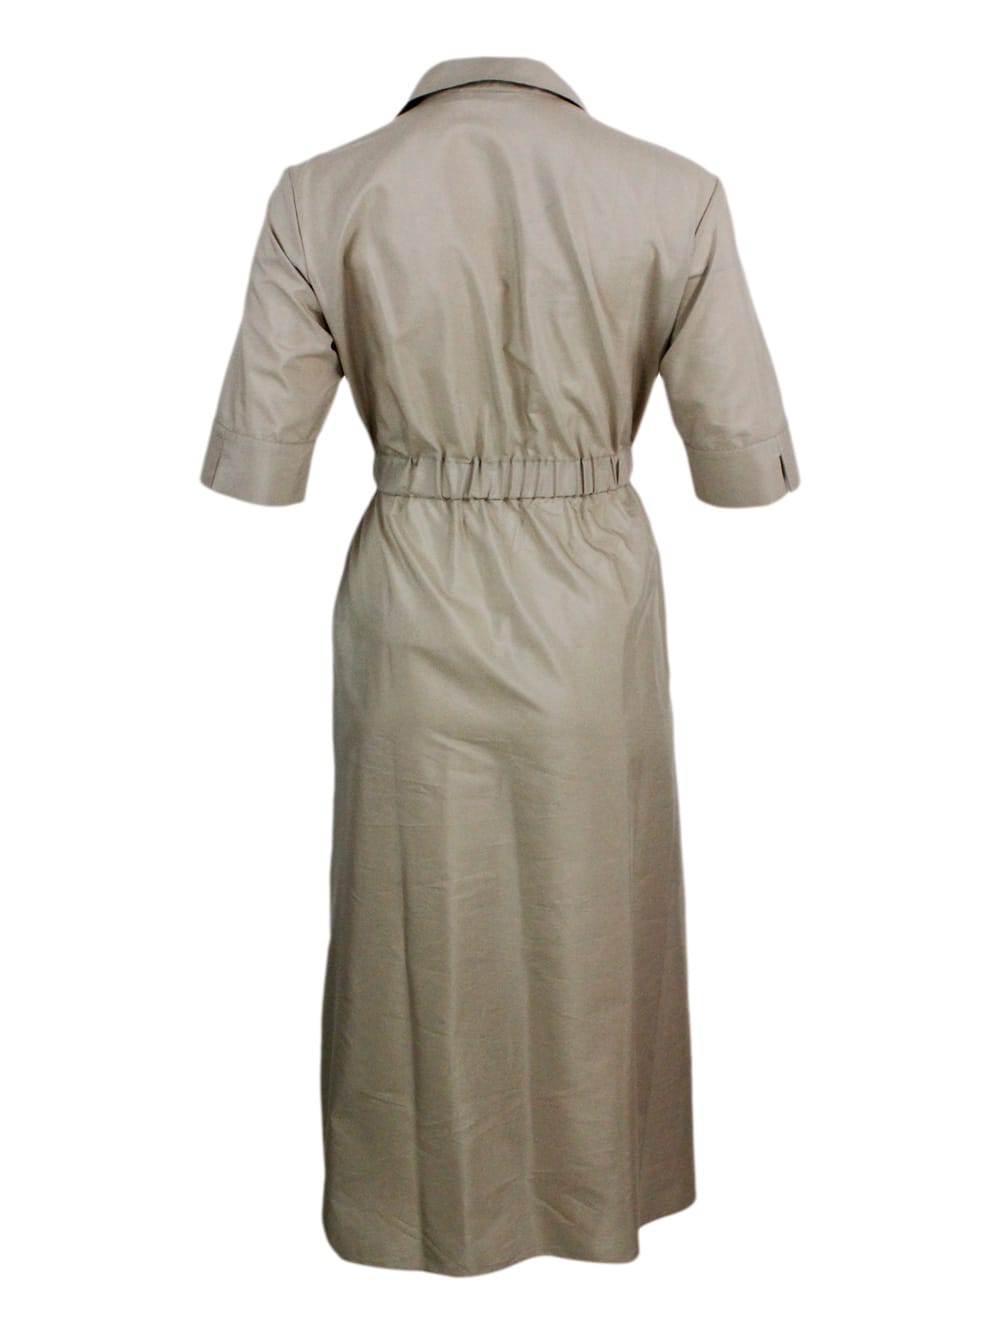 Shop Barba Napoli Long Dress Made Of Cotton With Short Sleeves, With Elastic Waist And Button Closure. Welt Pockets In Beige